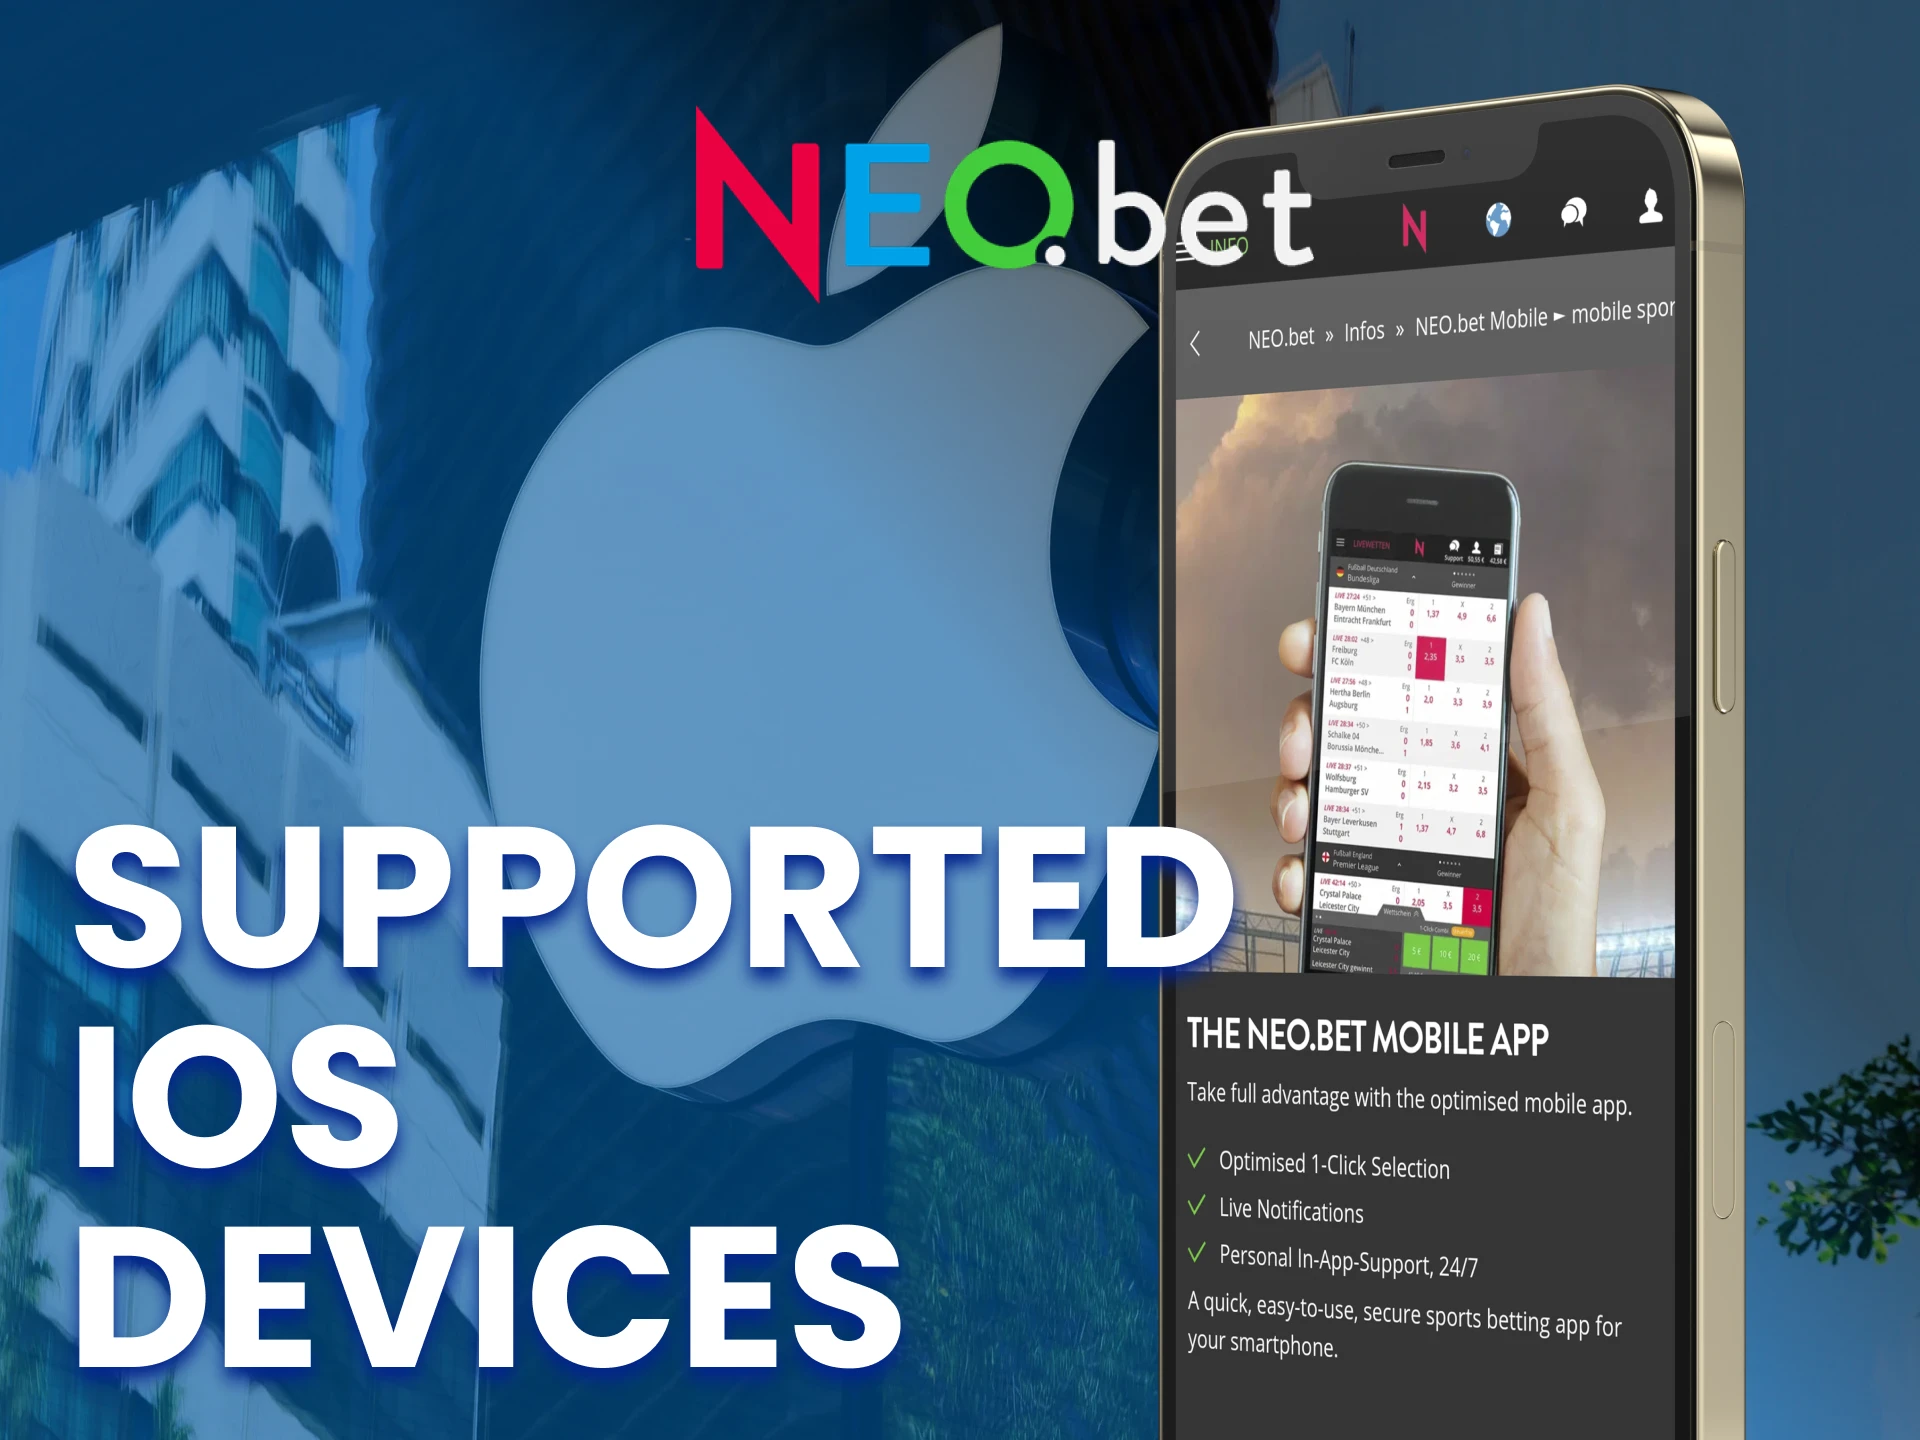 The NEO.bet app can be installed on a variety of devices with the iOS system.